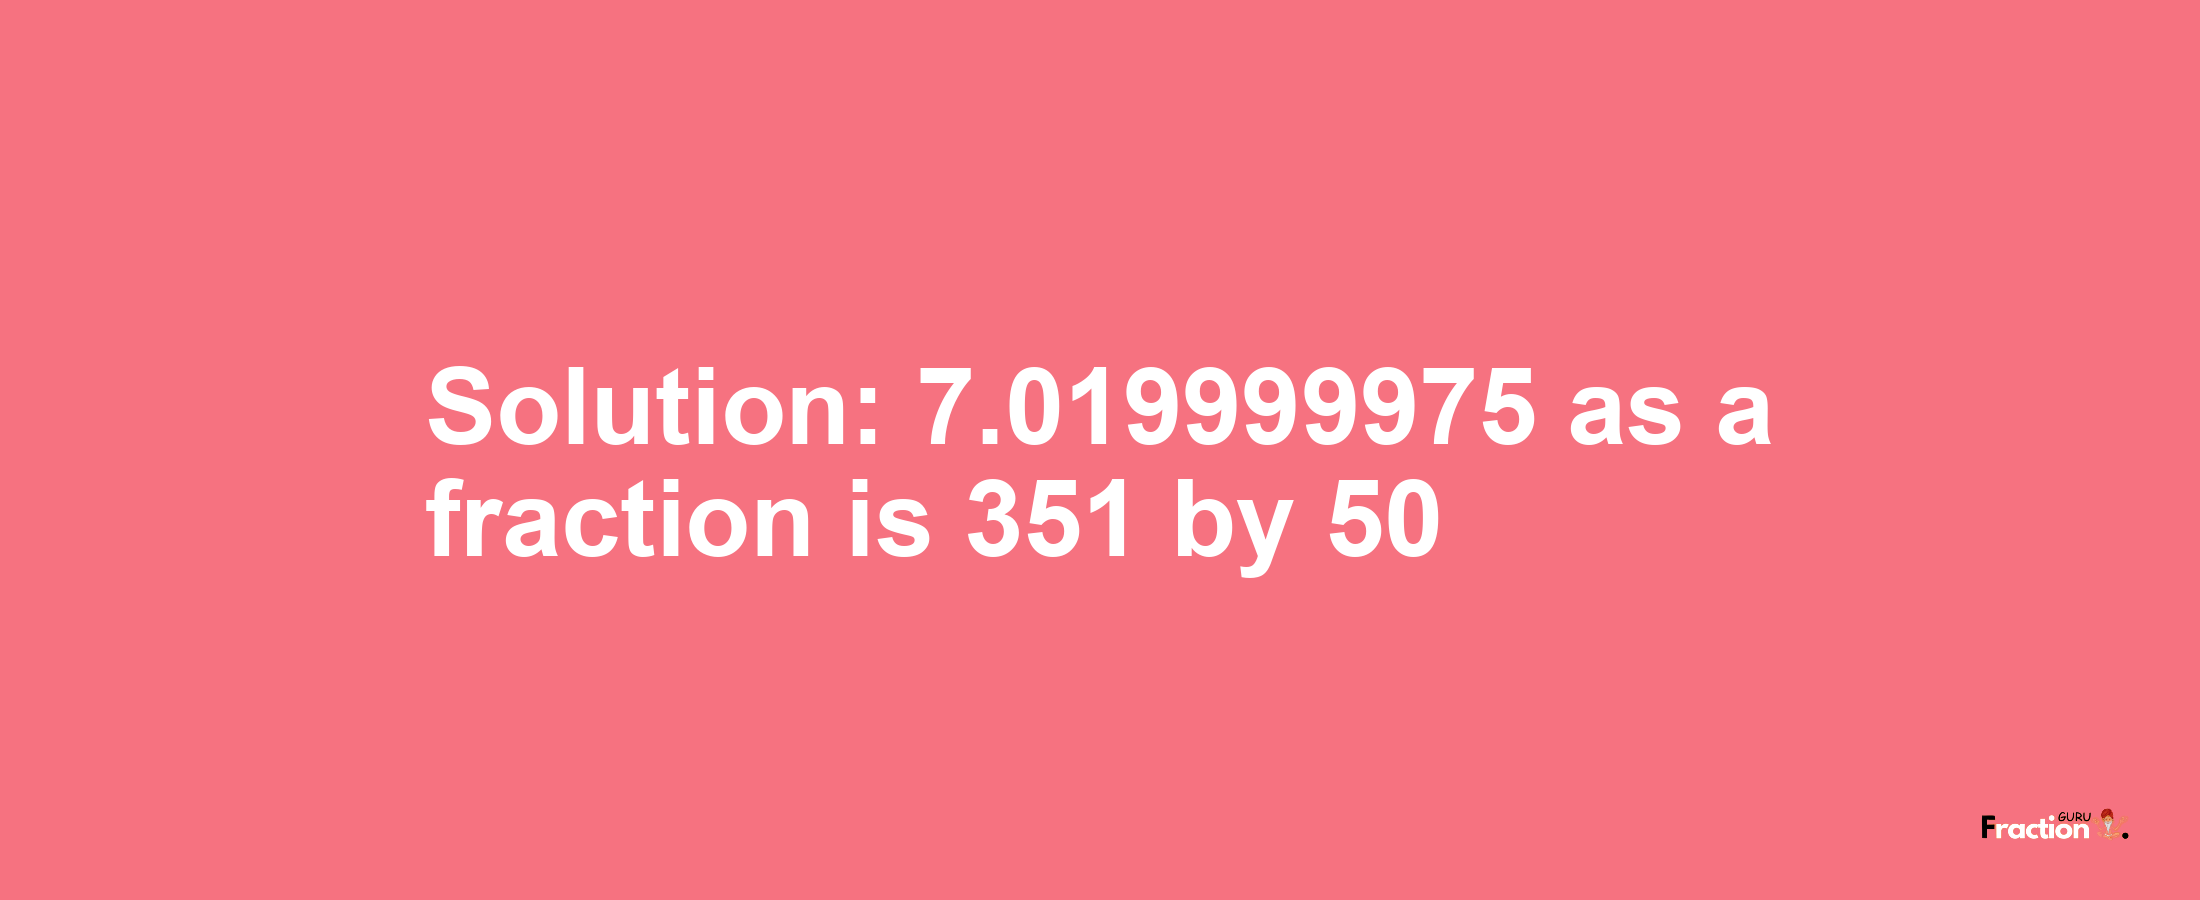 Solution:7.019999975 as a fraction is 351/50